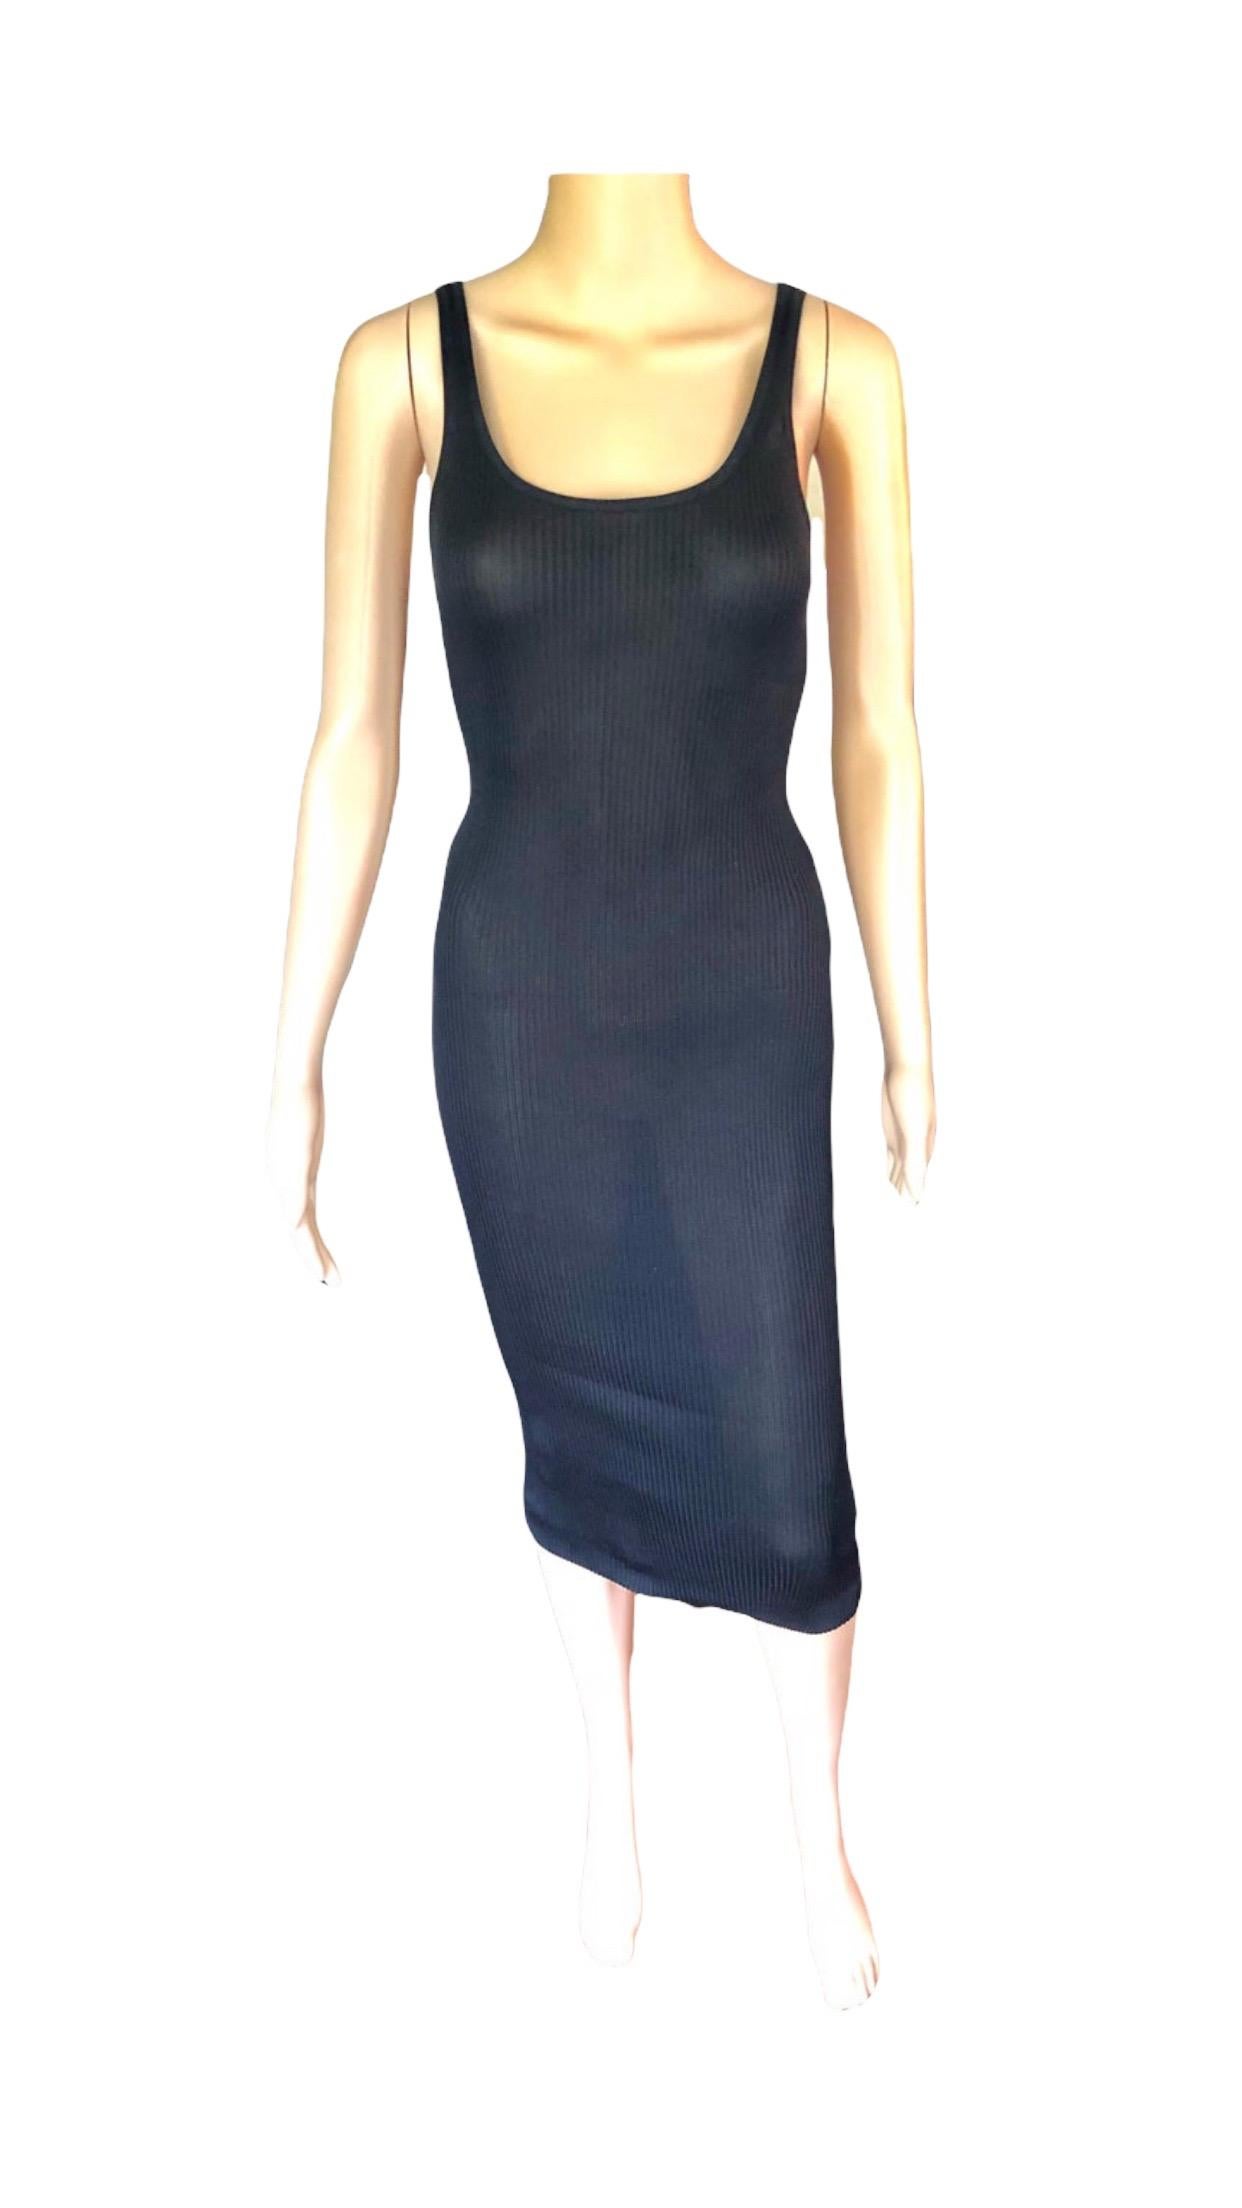 Chanel Vintage Sheer Silk Knitted Bodycon Black Dress 2